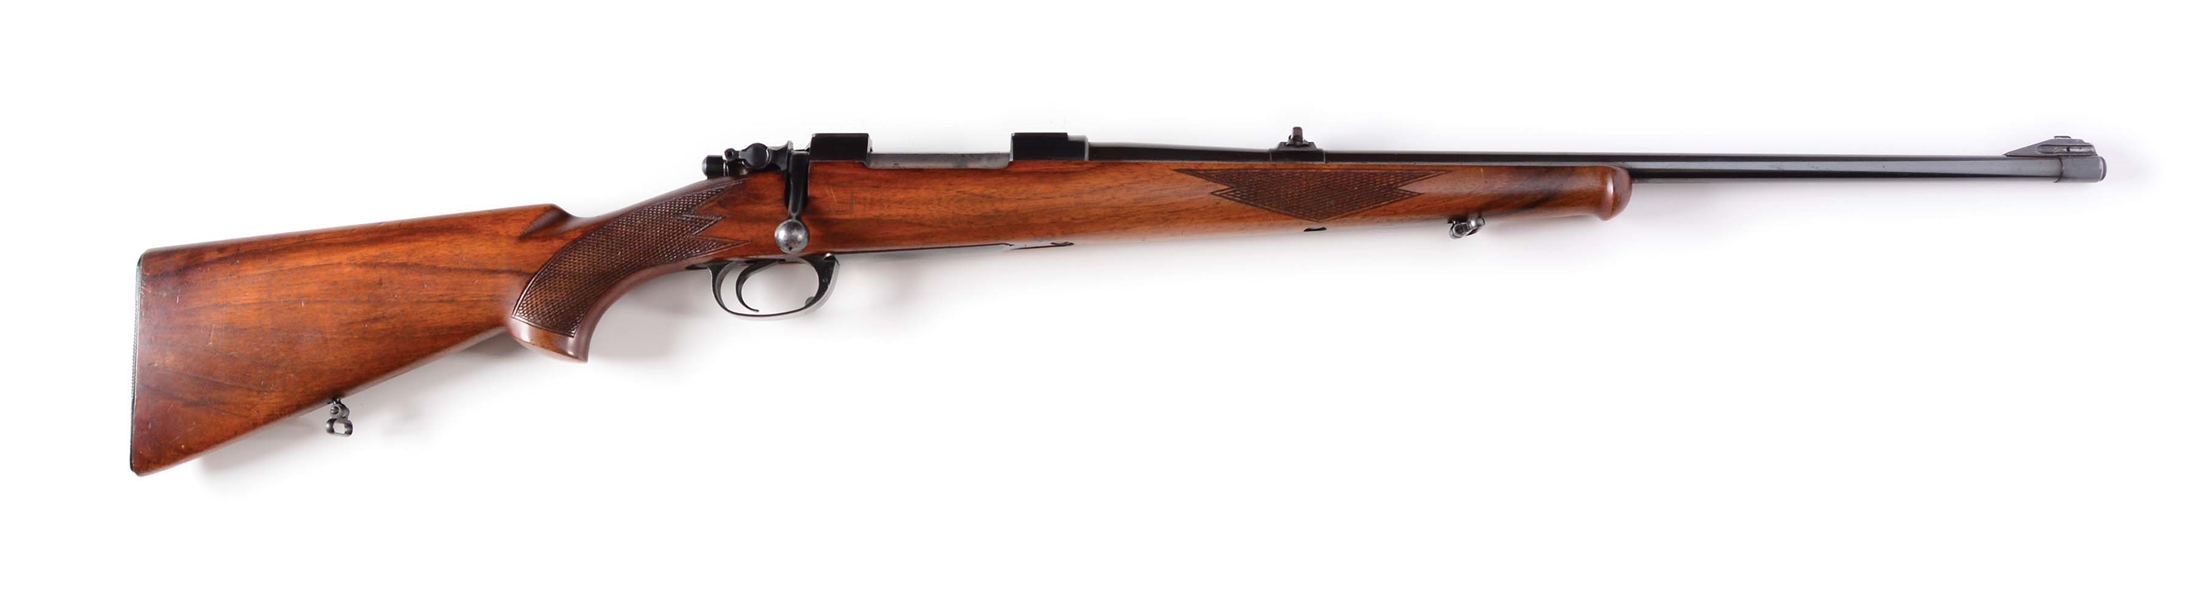 (C) BRNO ZG 47 BOLT ACTION SPORTING RIFLE IN 9.3 X 62